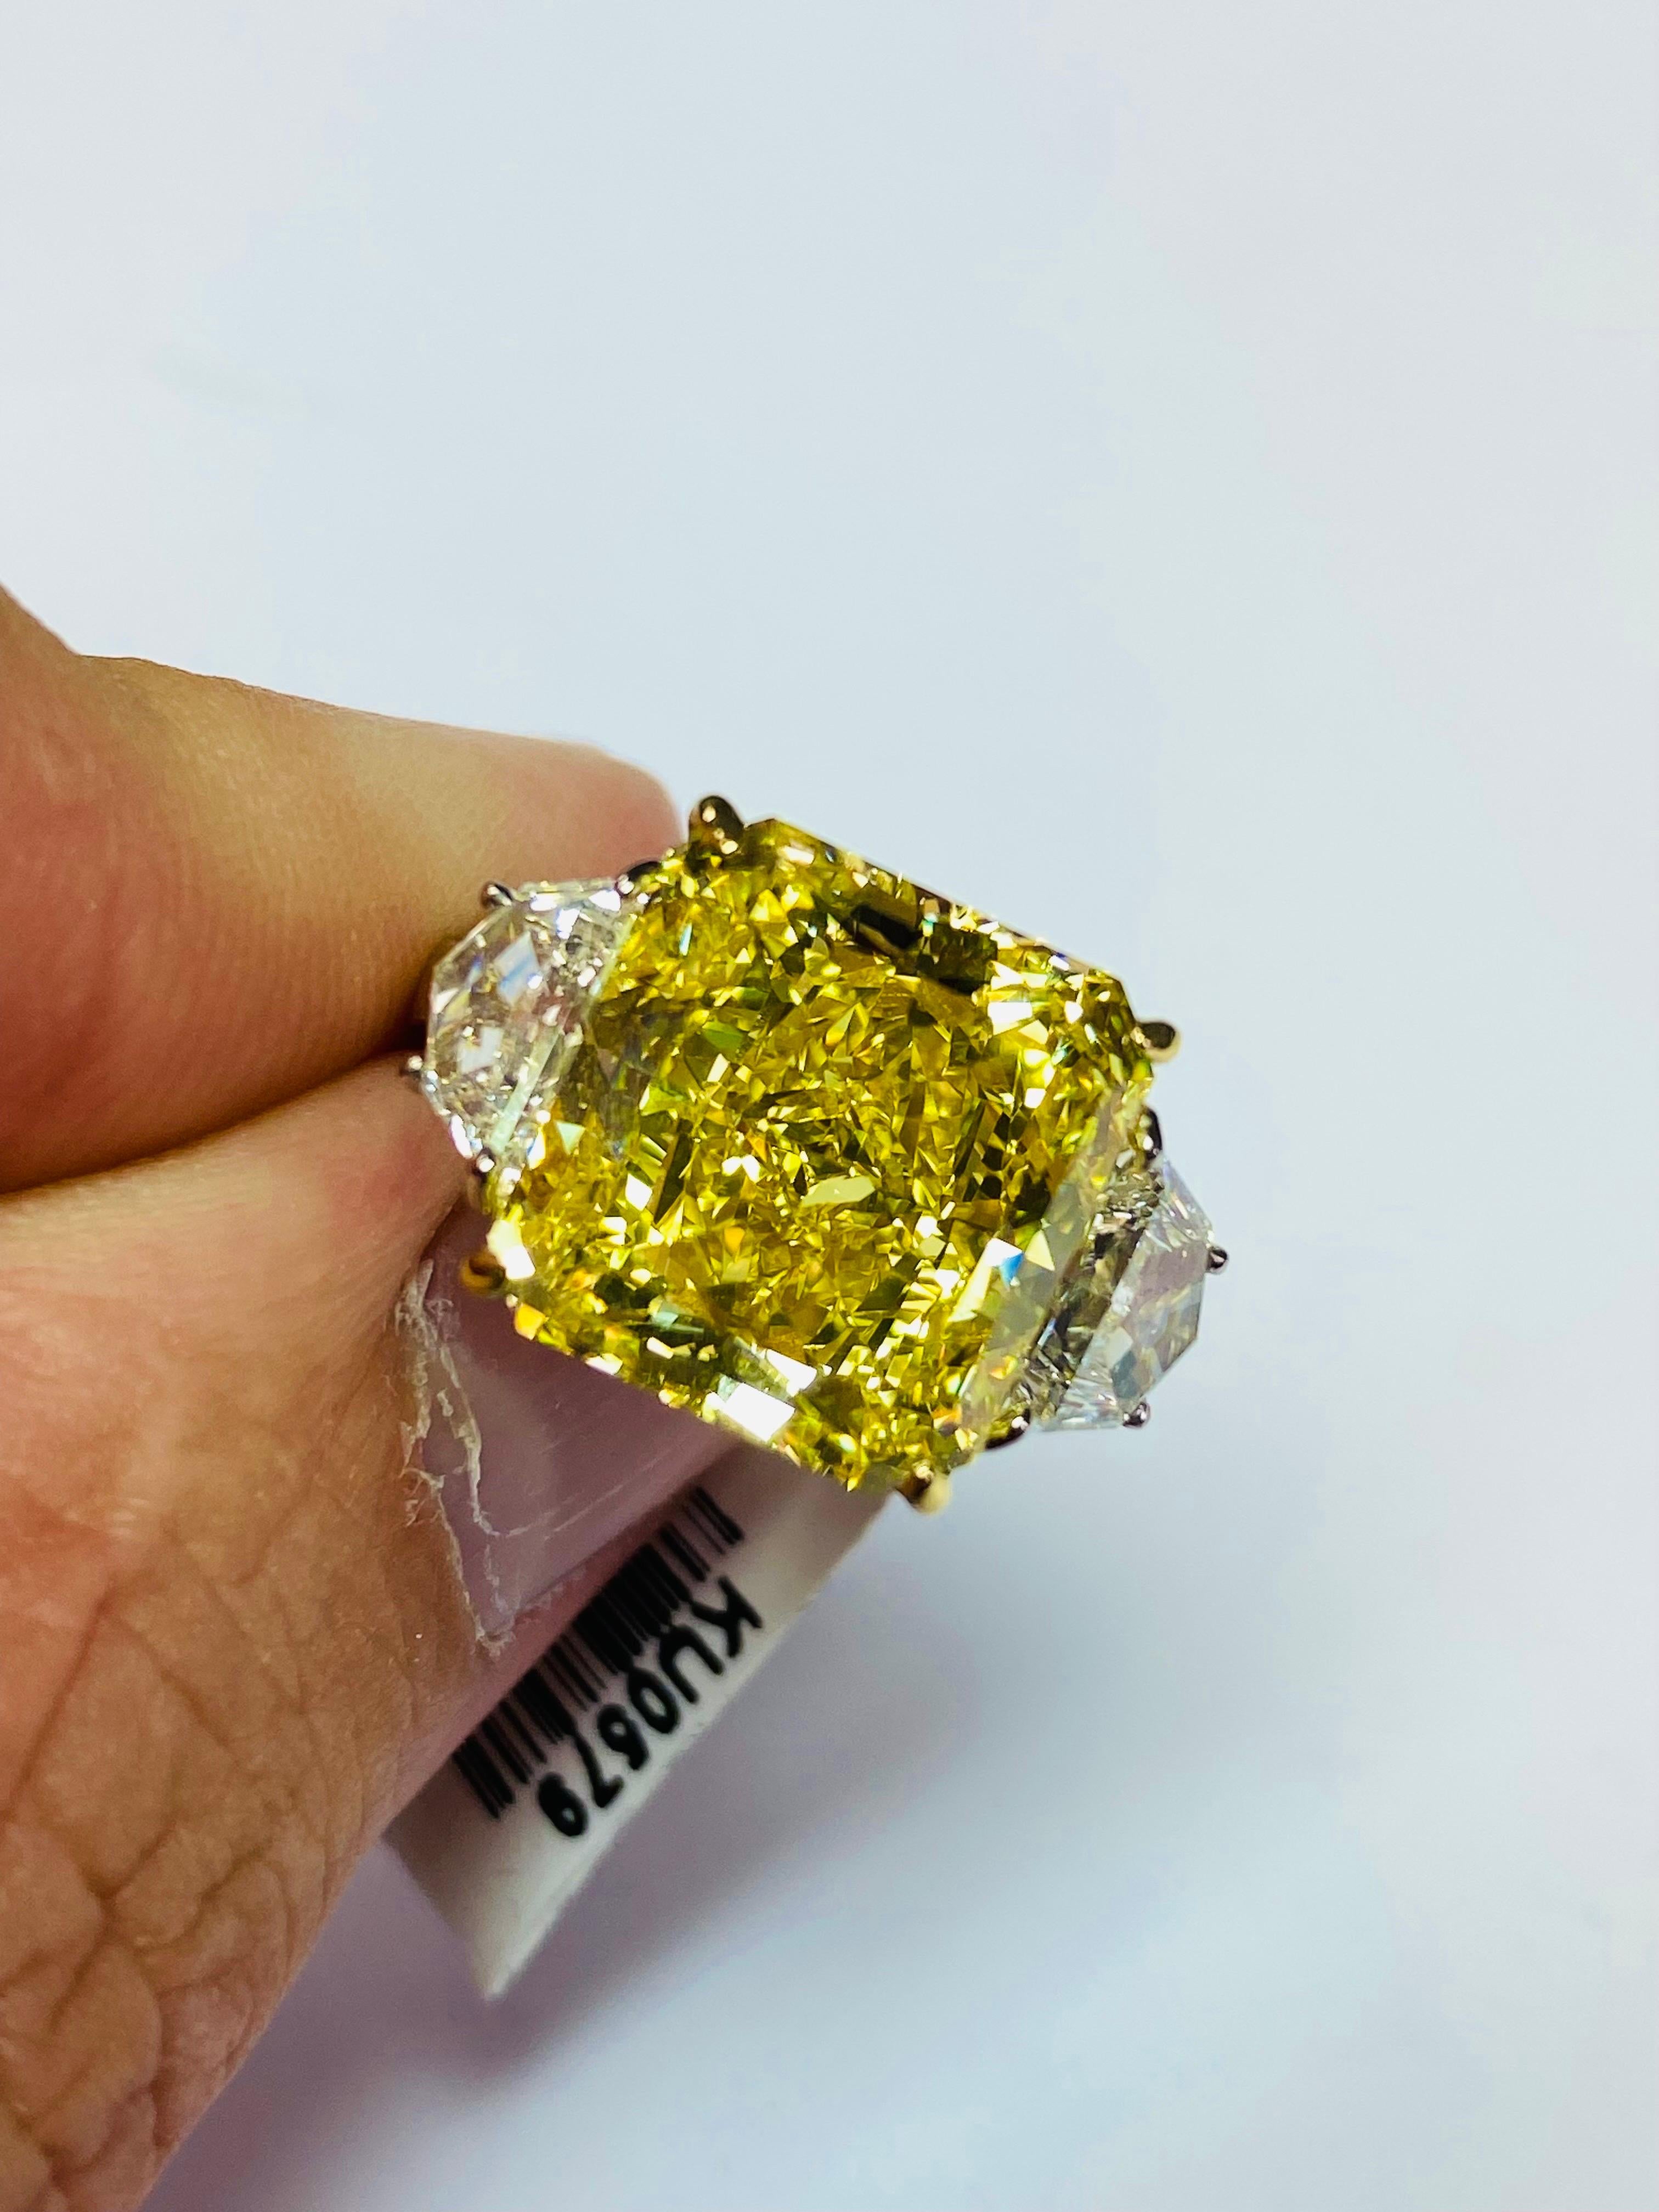 From Emilio Jewelry, a well known and respected wholesaler/dealer located on New York’s iconic Fifth Avenue,
The focal point of this ring is featuring a Gia certified natural Fancy Vivid Pure Yellow Diamond with a true golden color! 
Total weight